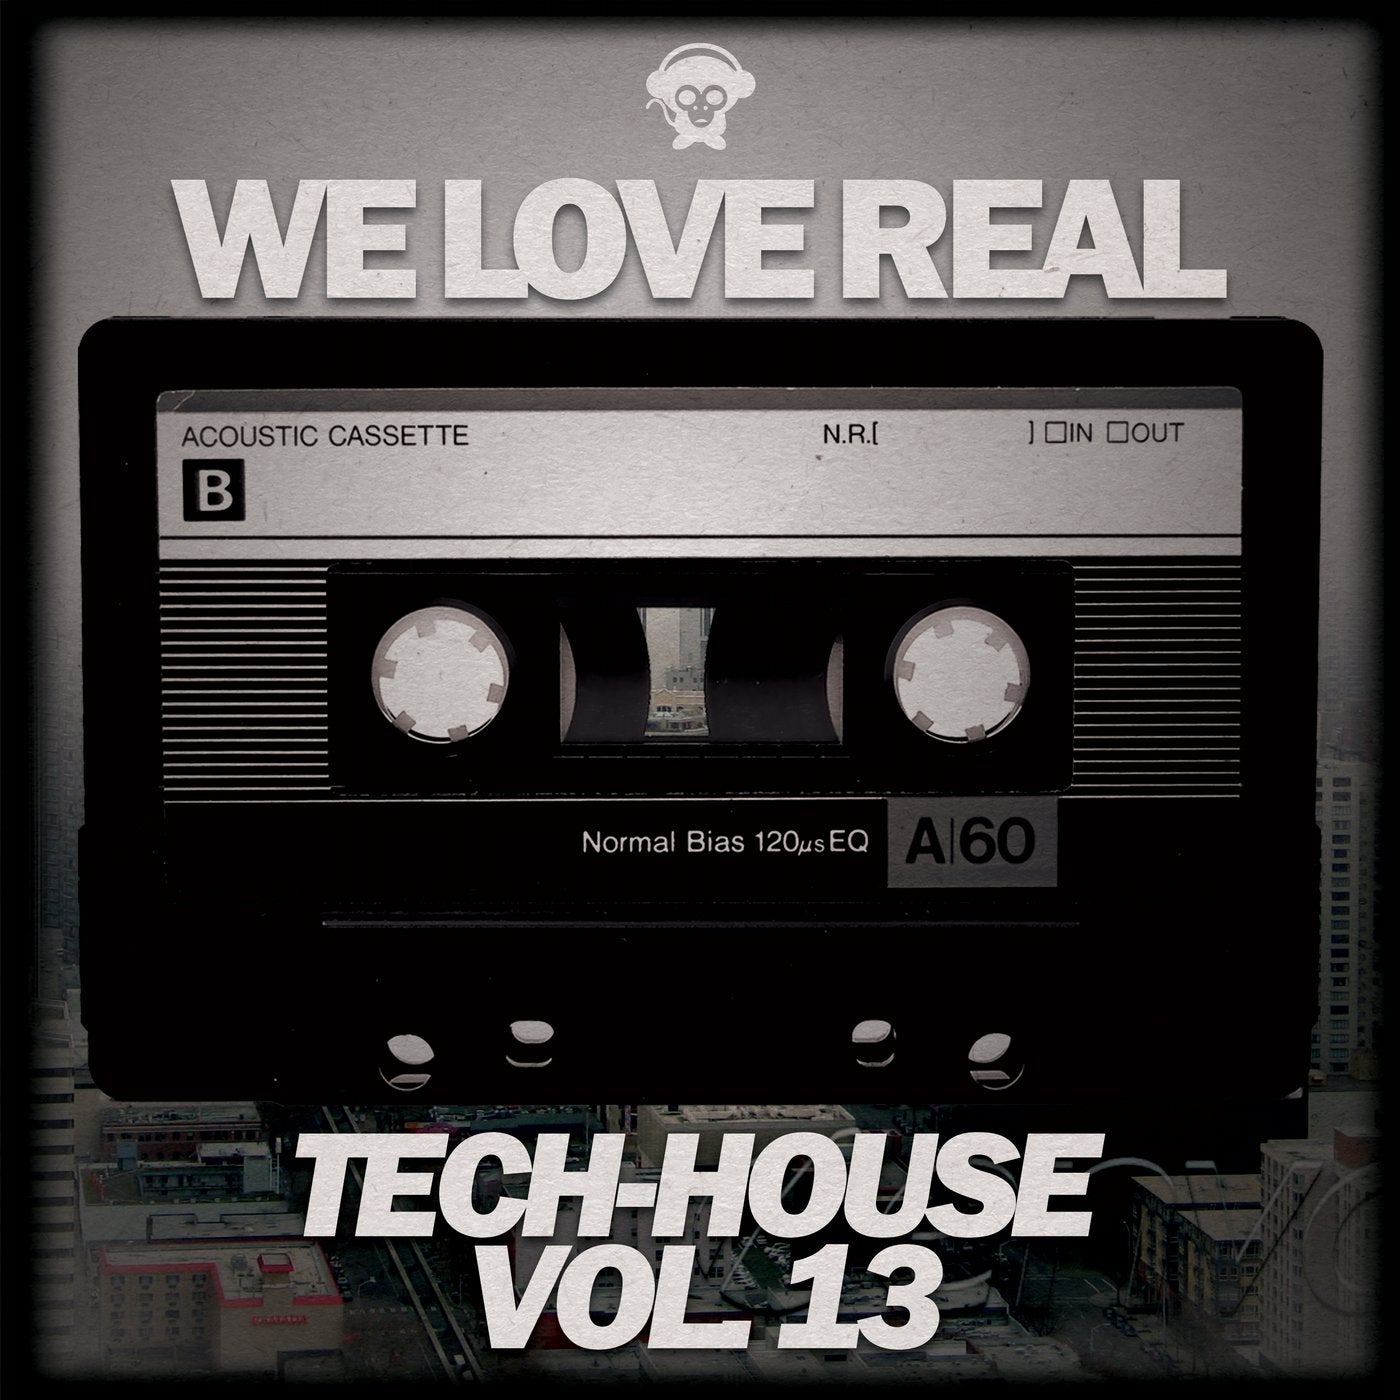 We Love Real Tech-House, Vol. 13